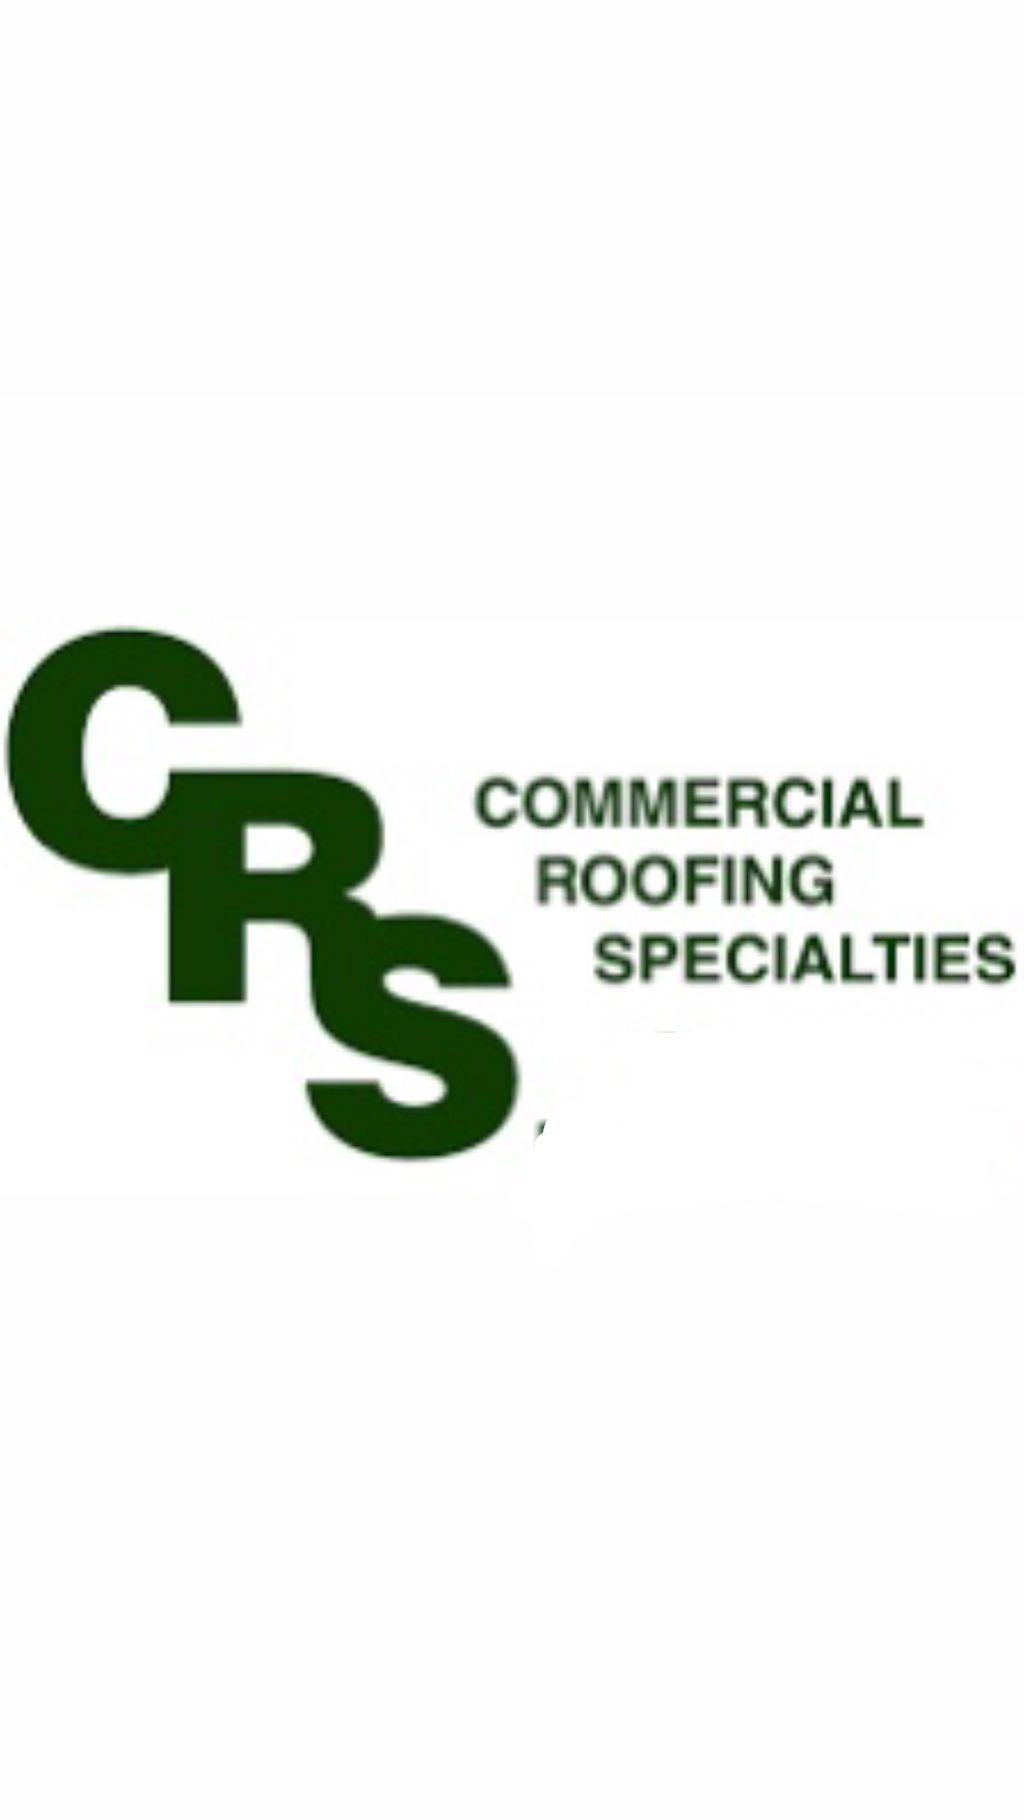 Commercial Roofing Specialists by Champion Roofing